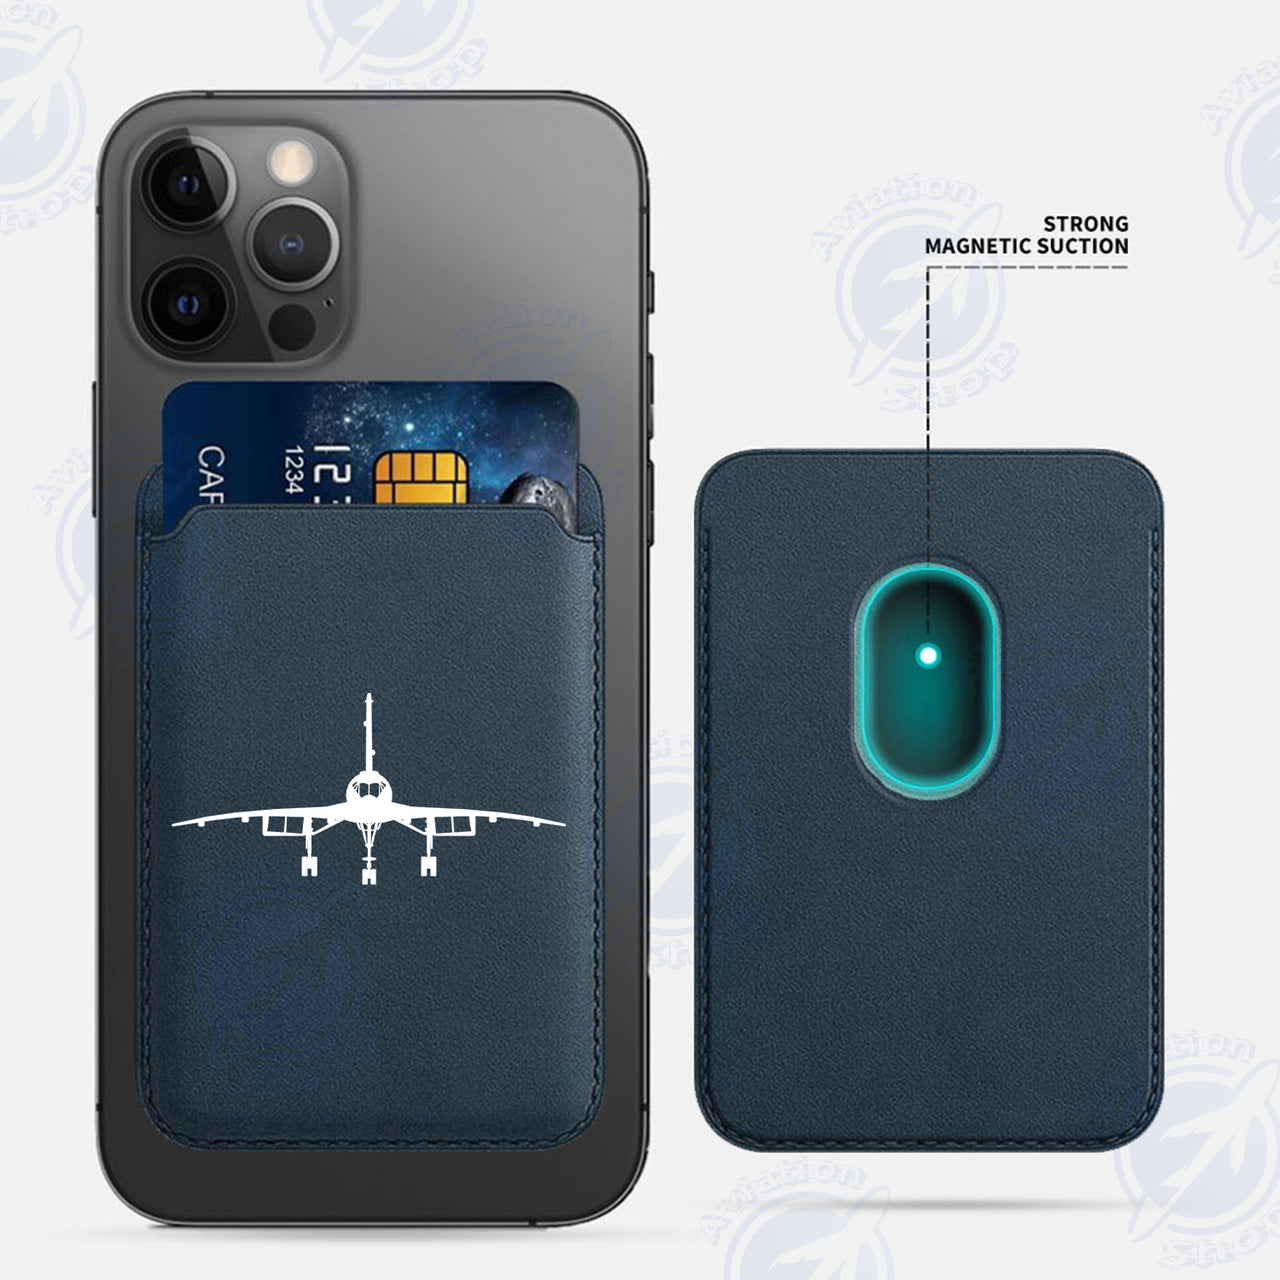 Concorde Silhouette iPhone Cases Magnetic Card Wallet